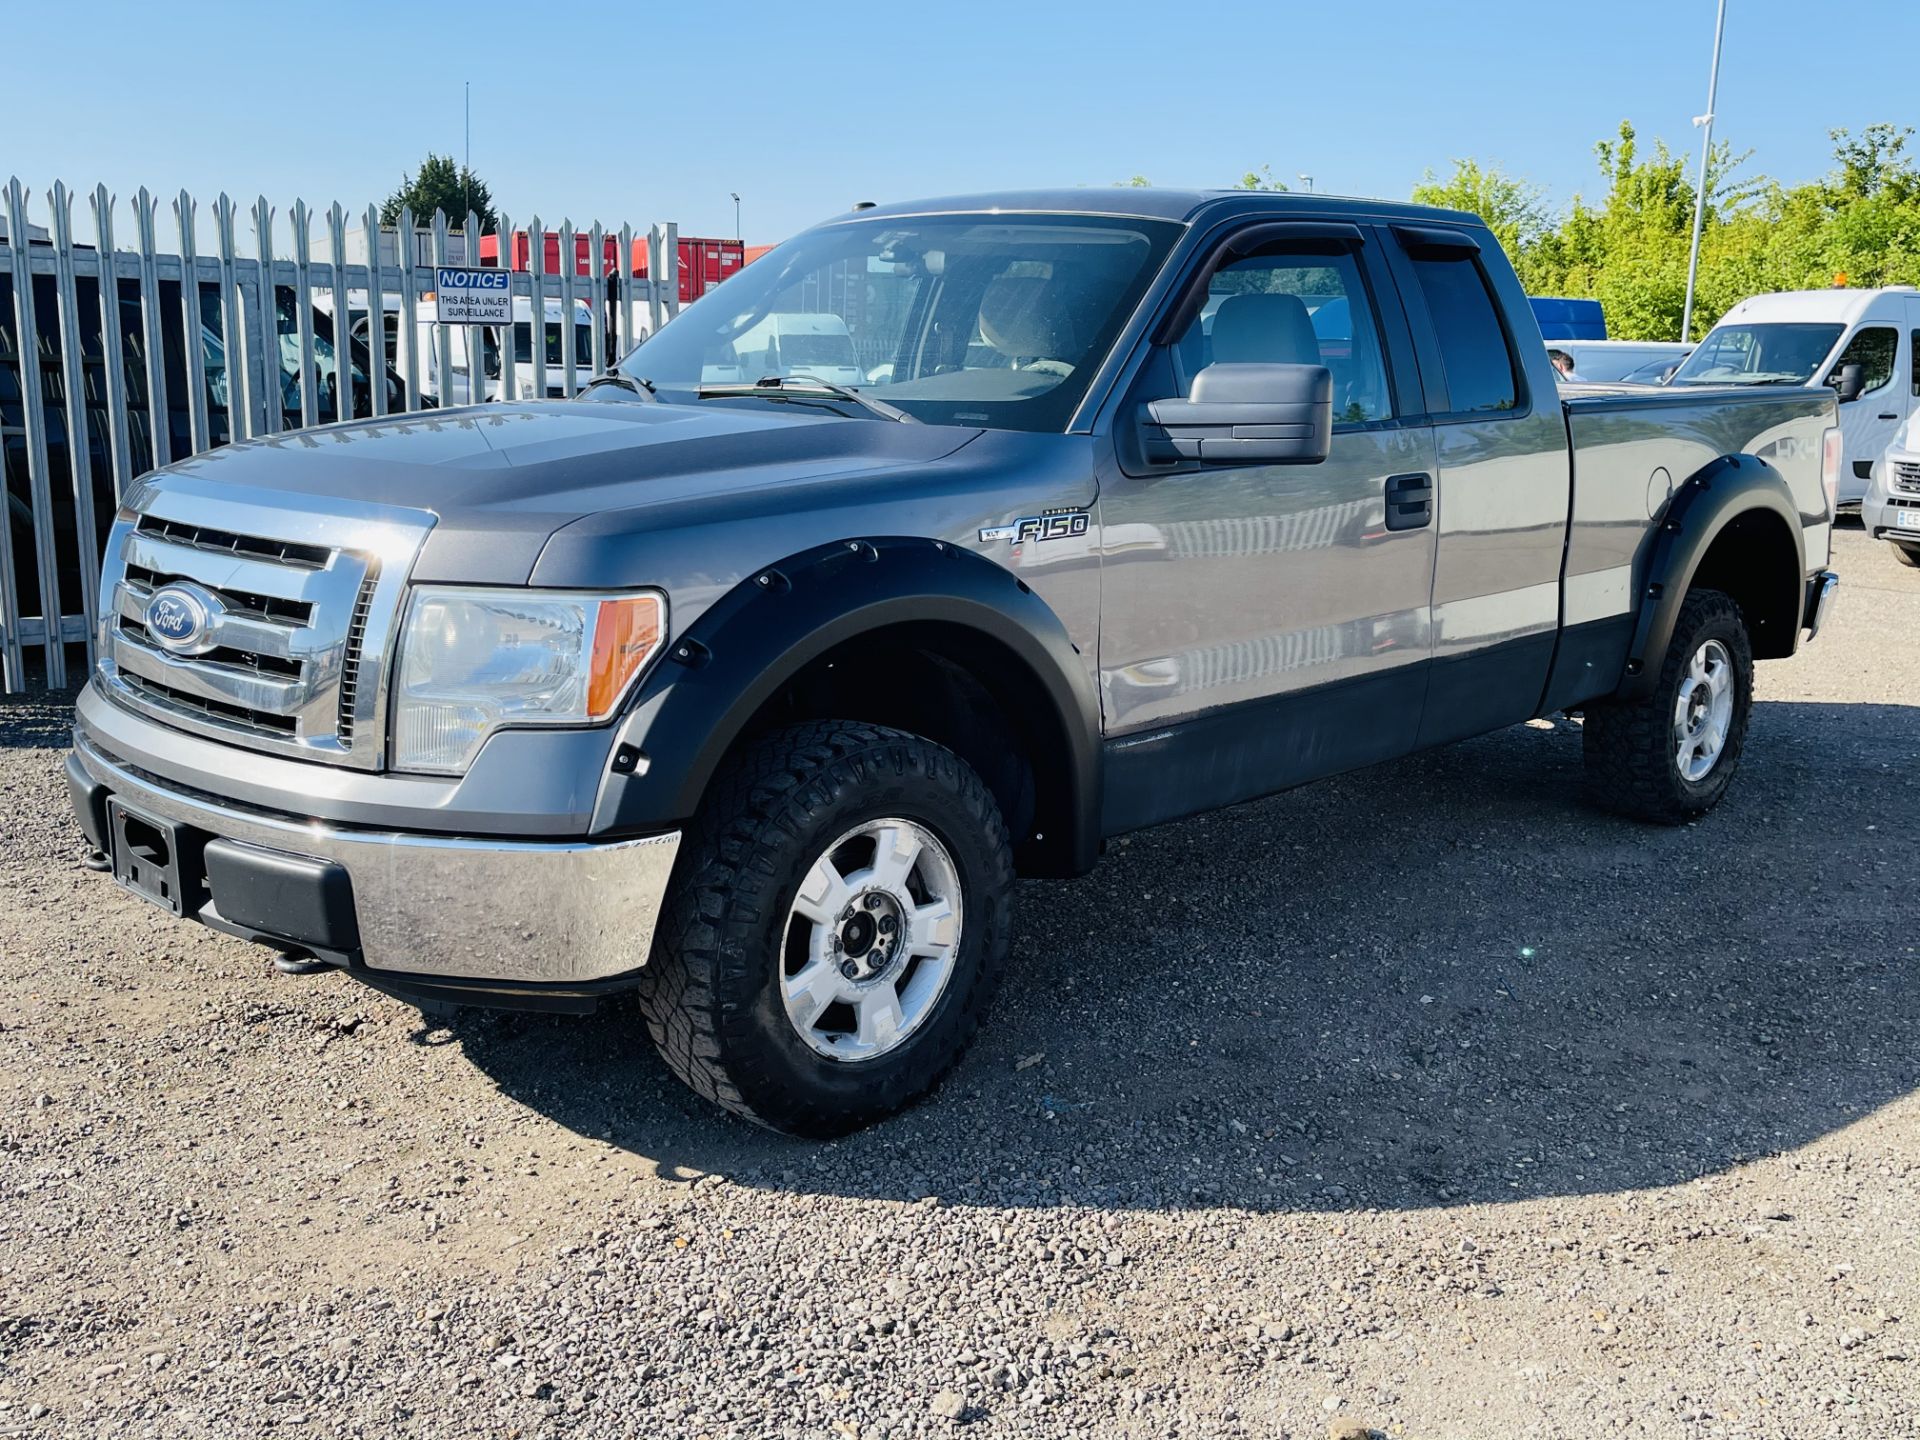 ** ON SALE **Ford F-150 4.6L V8 XLT Edition Super-Cab 4x4 '2010 Year' Air Con - 6 seats- Pick Up - Image 4 of 19